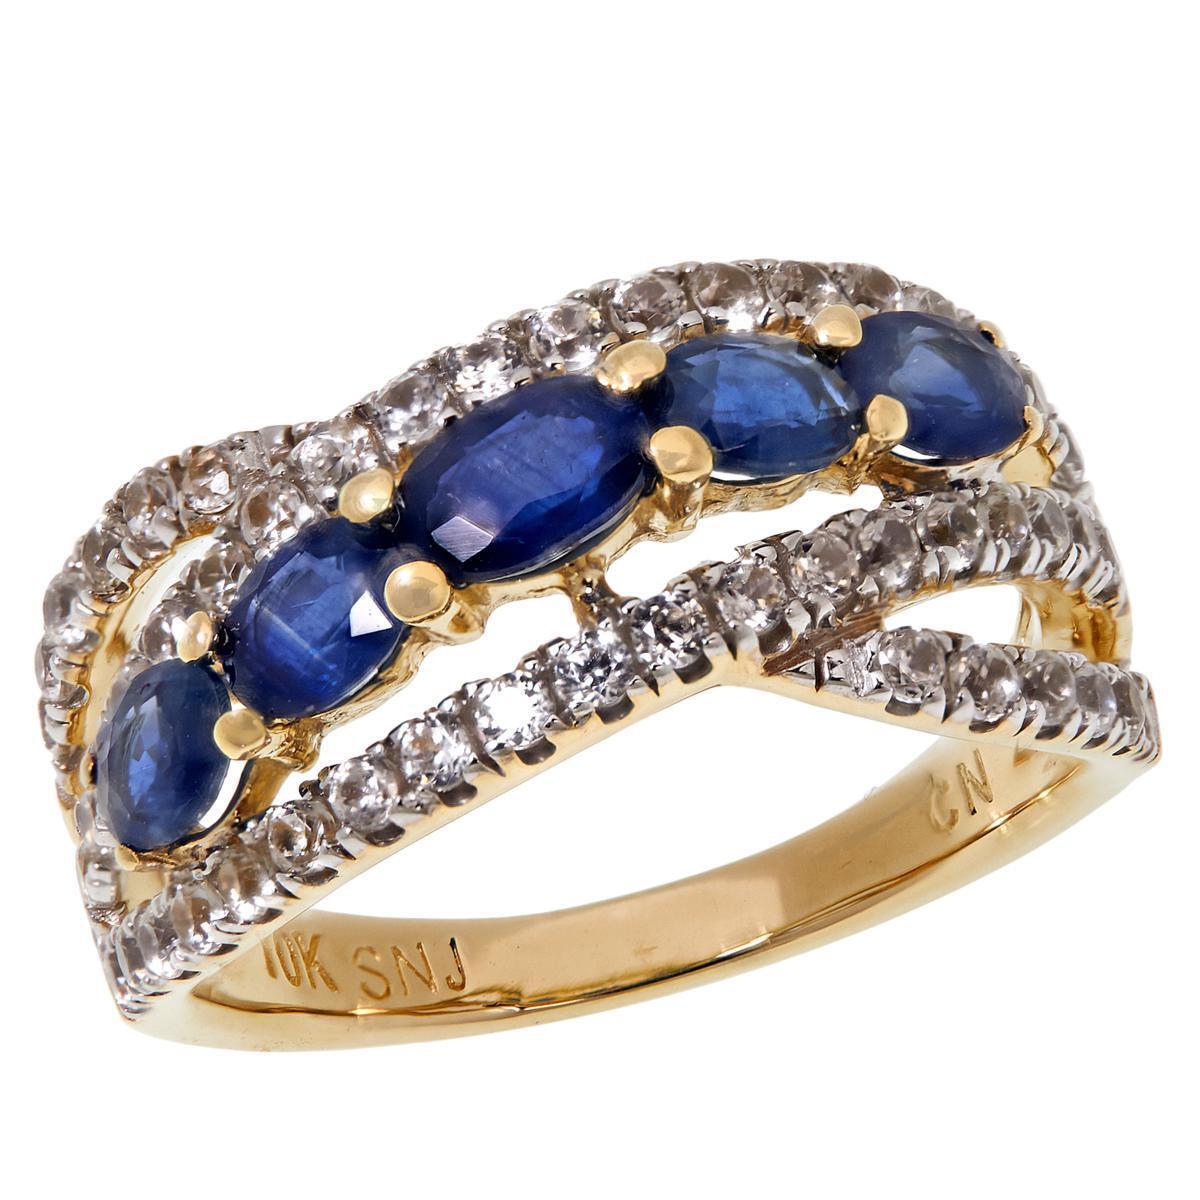 Colleen Lopez 10K Gold Genuine Sapphire and White Zircon Ring. Size 6